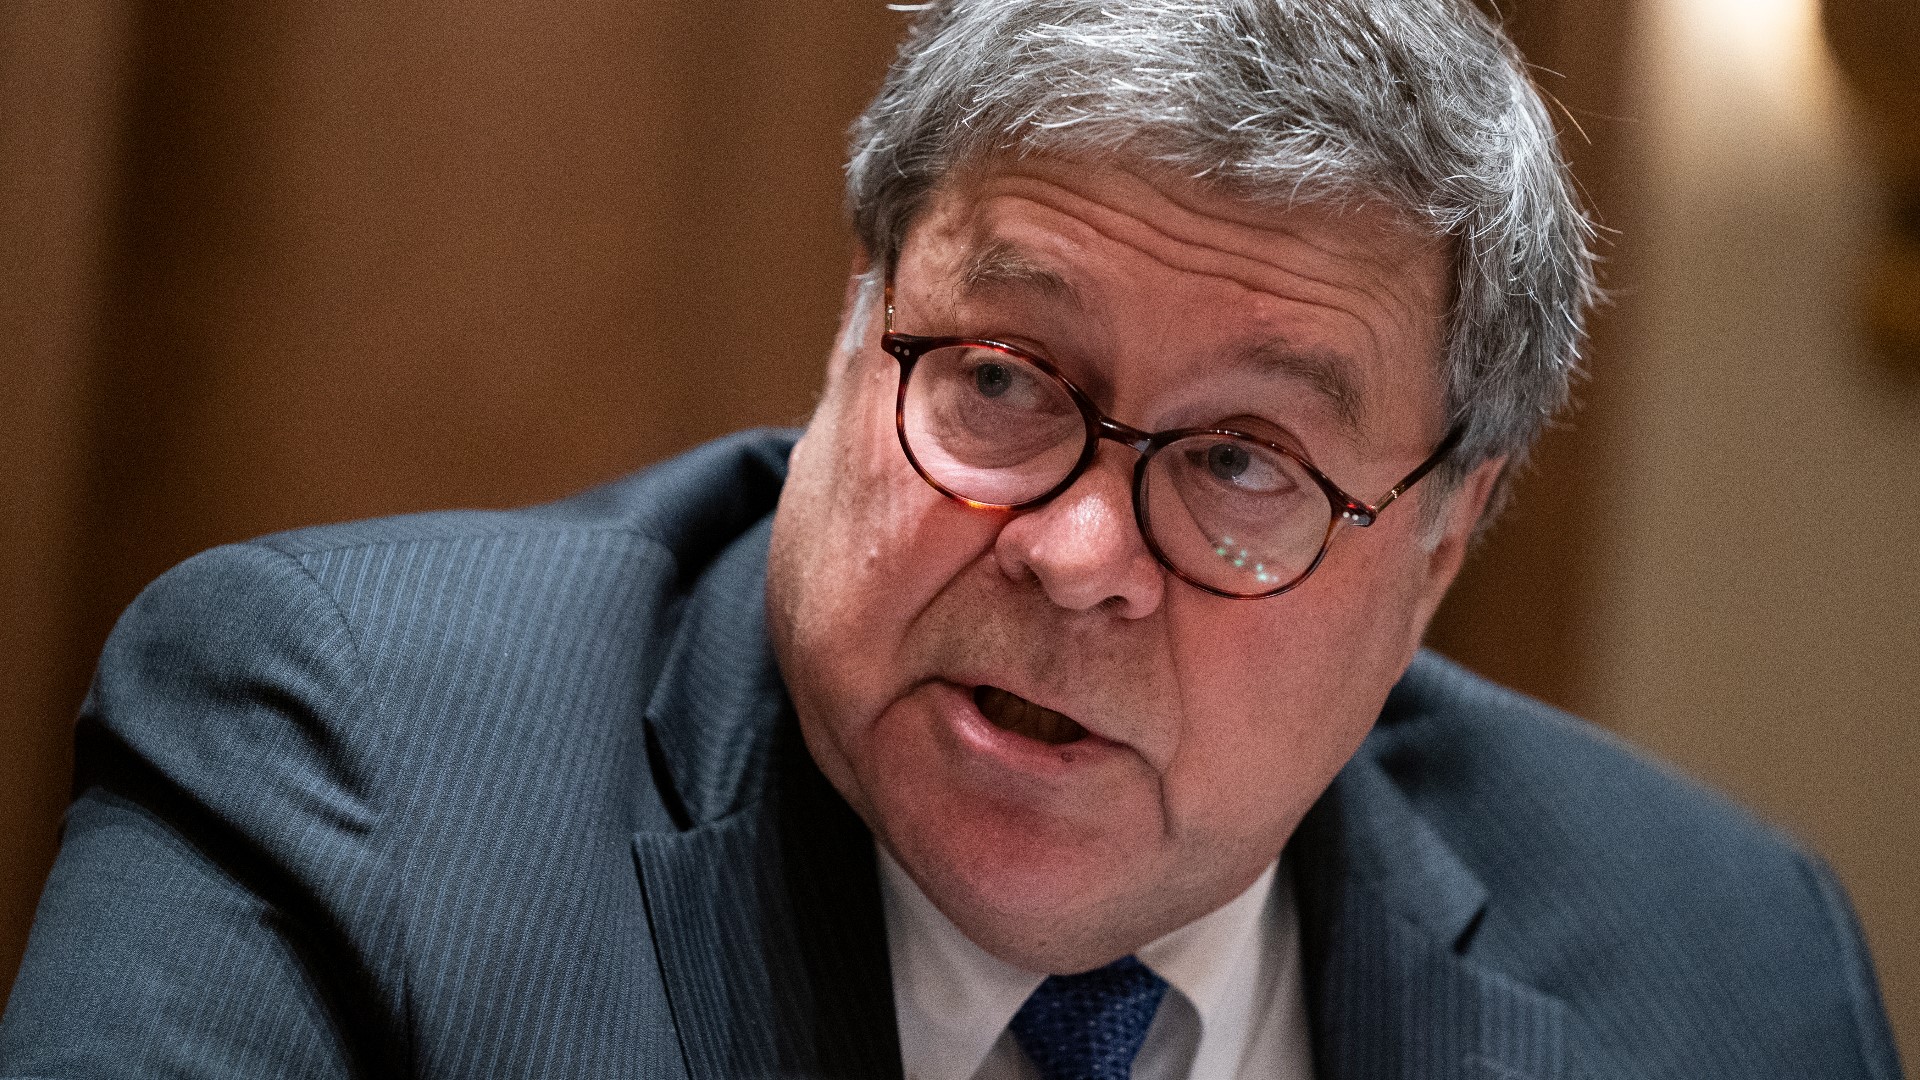 U.S. Attorney General William Barr will be stepping down Dec. 23, he said in a letter to President Donald Trump